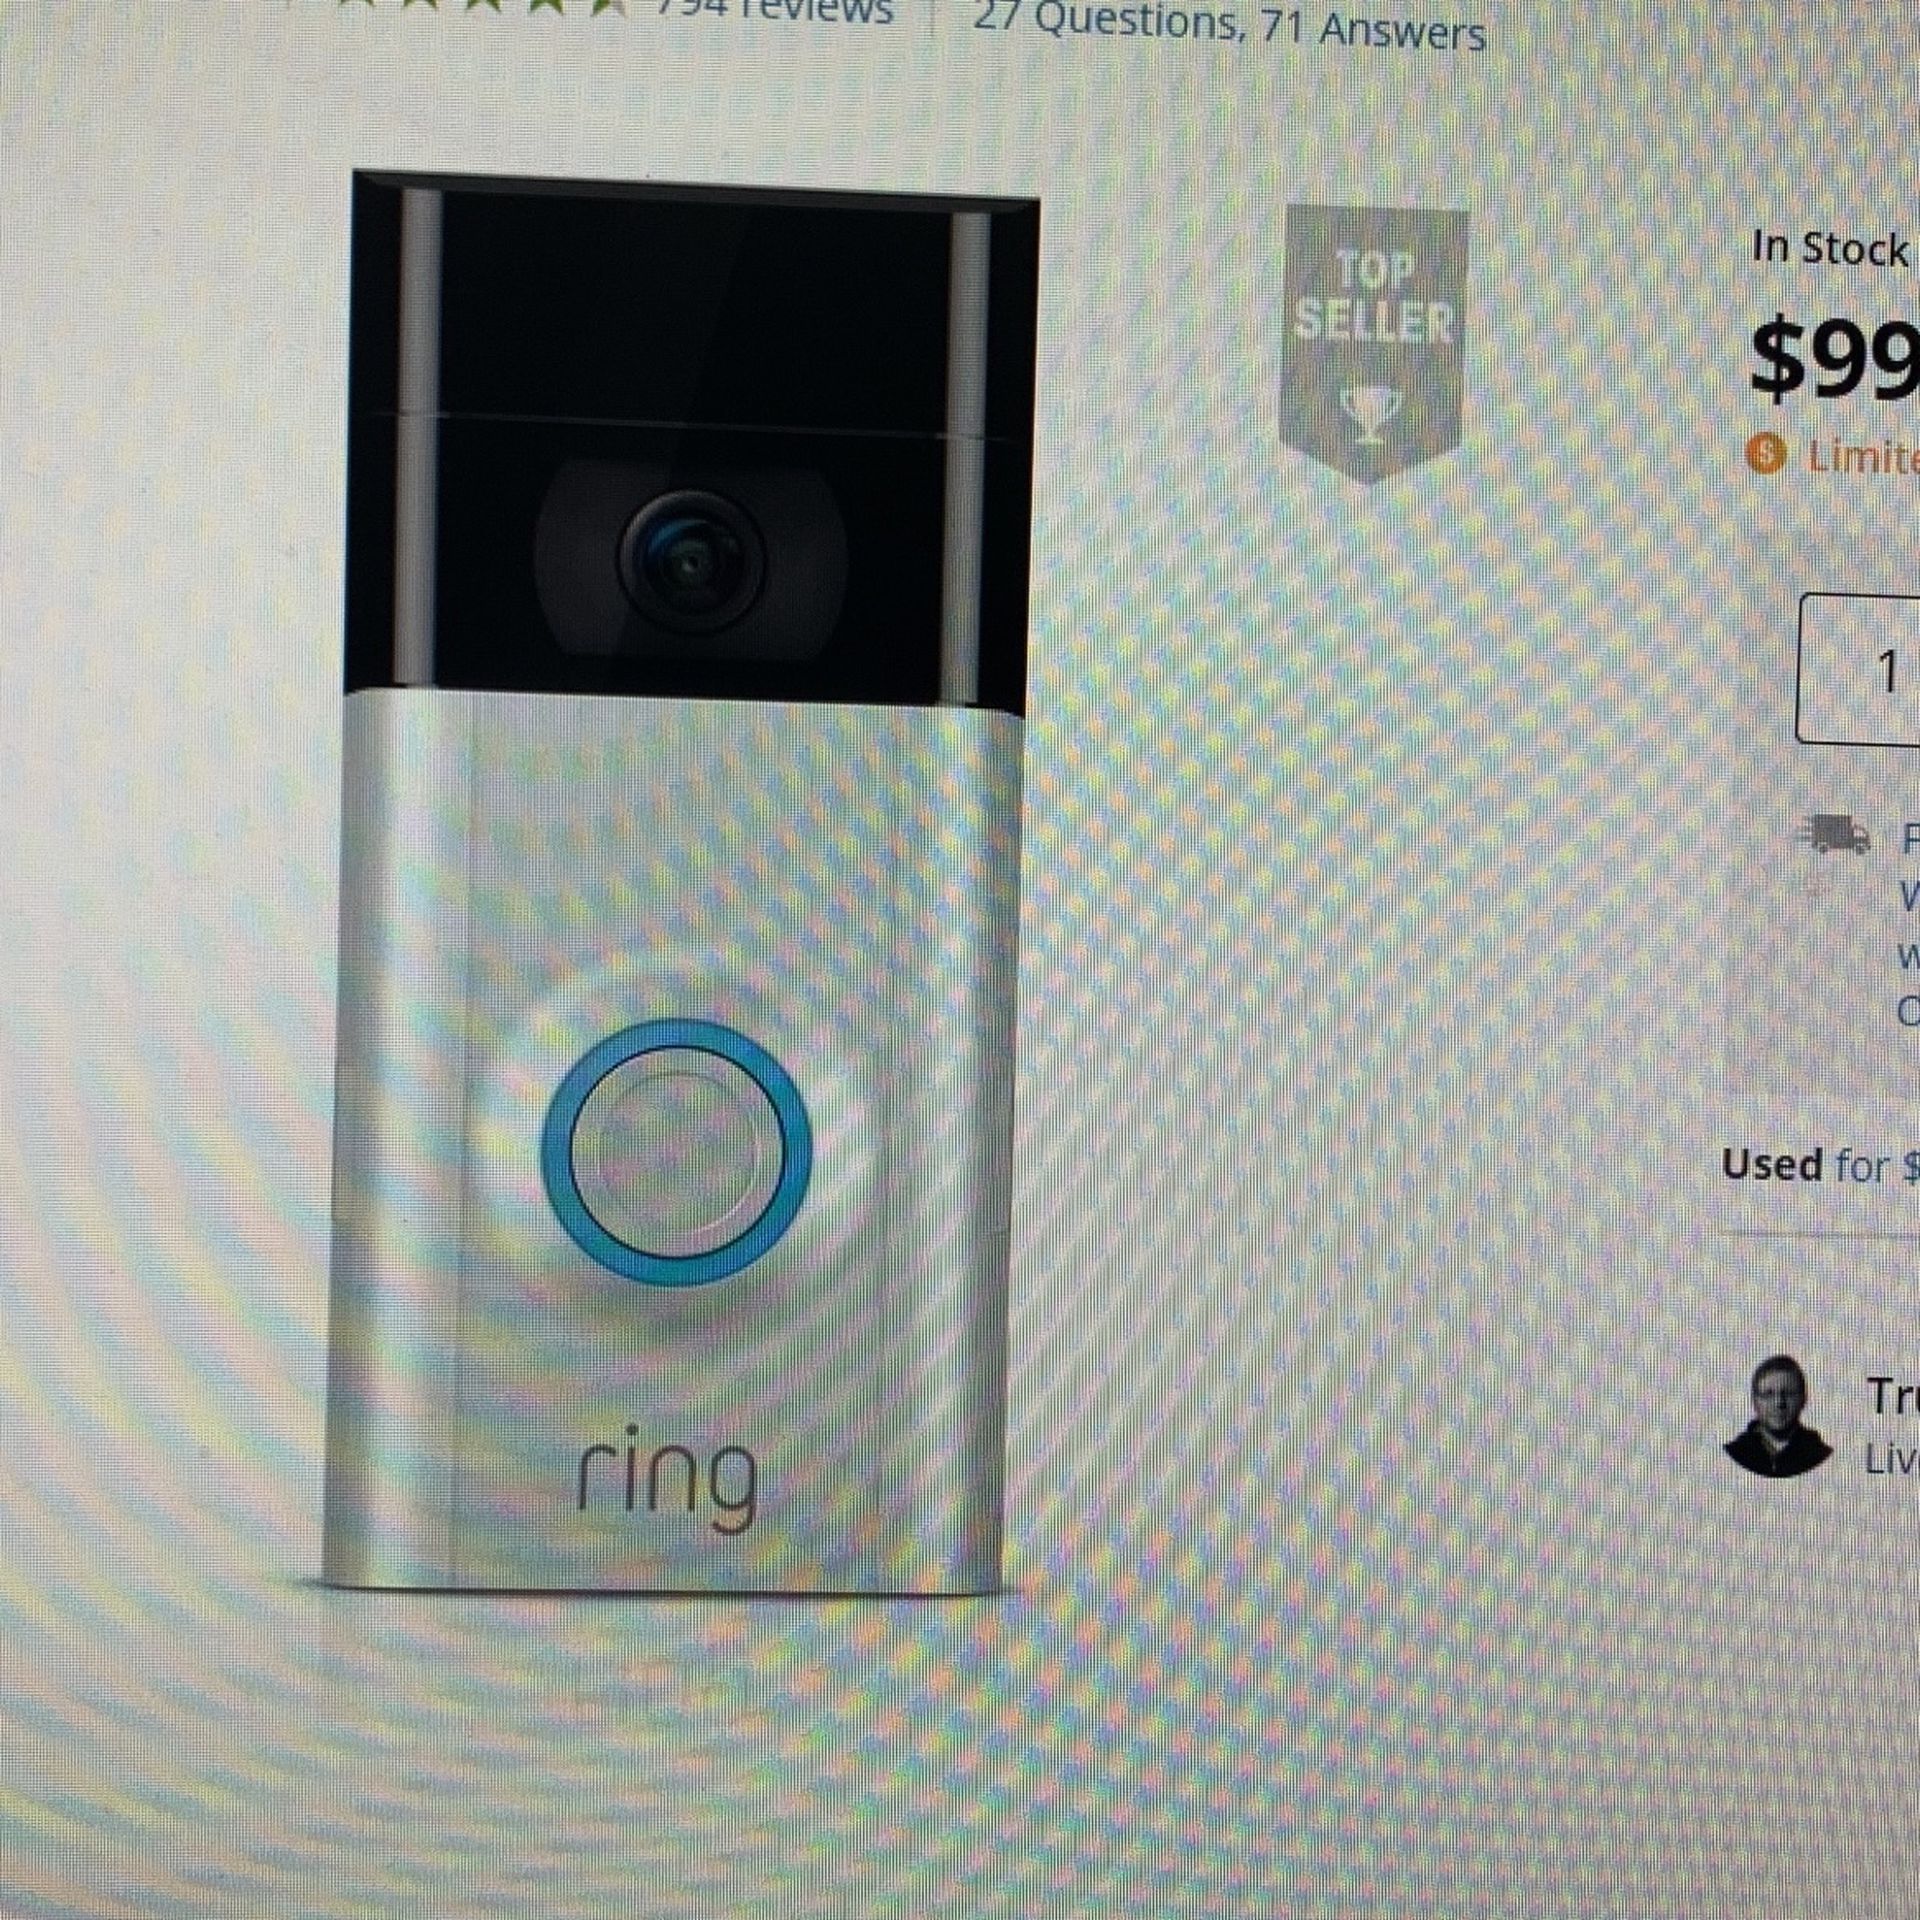 Ring 1080 Video Doorbell With Night Vision